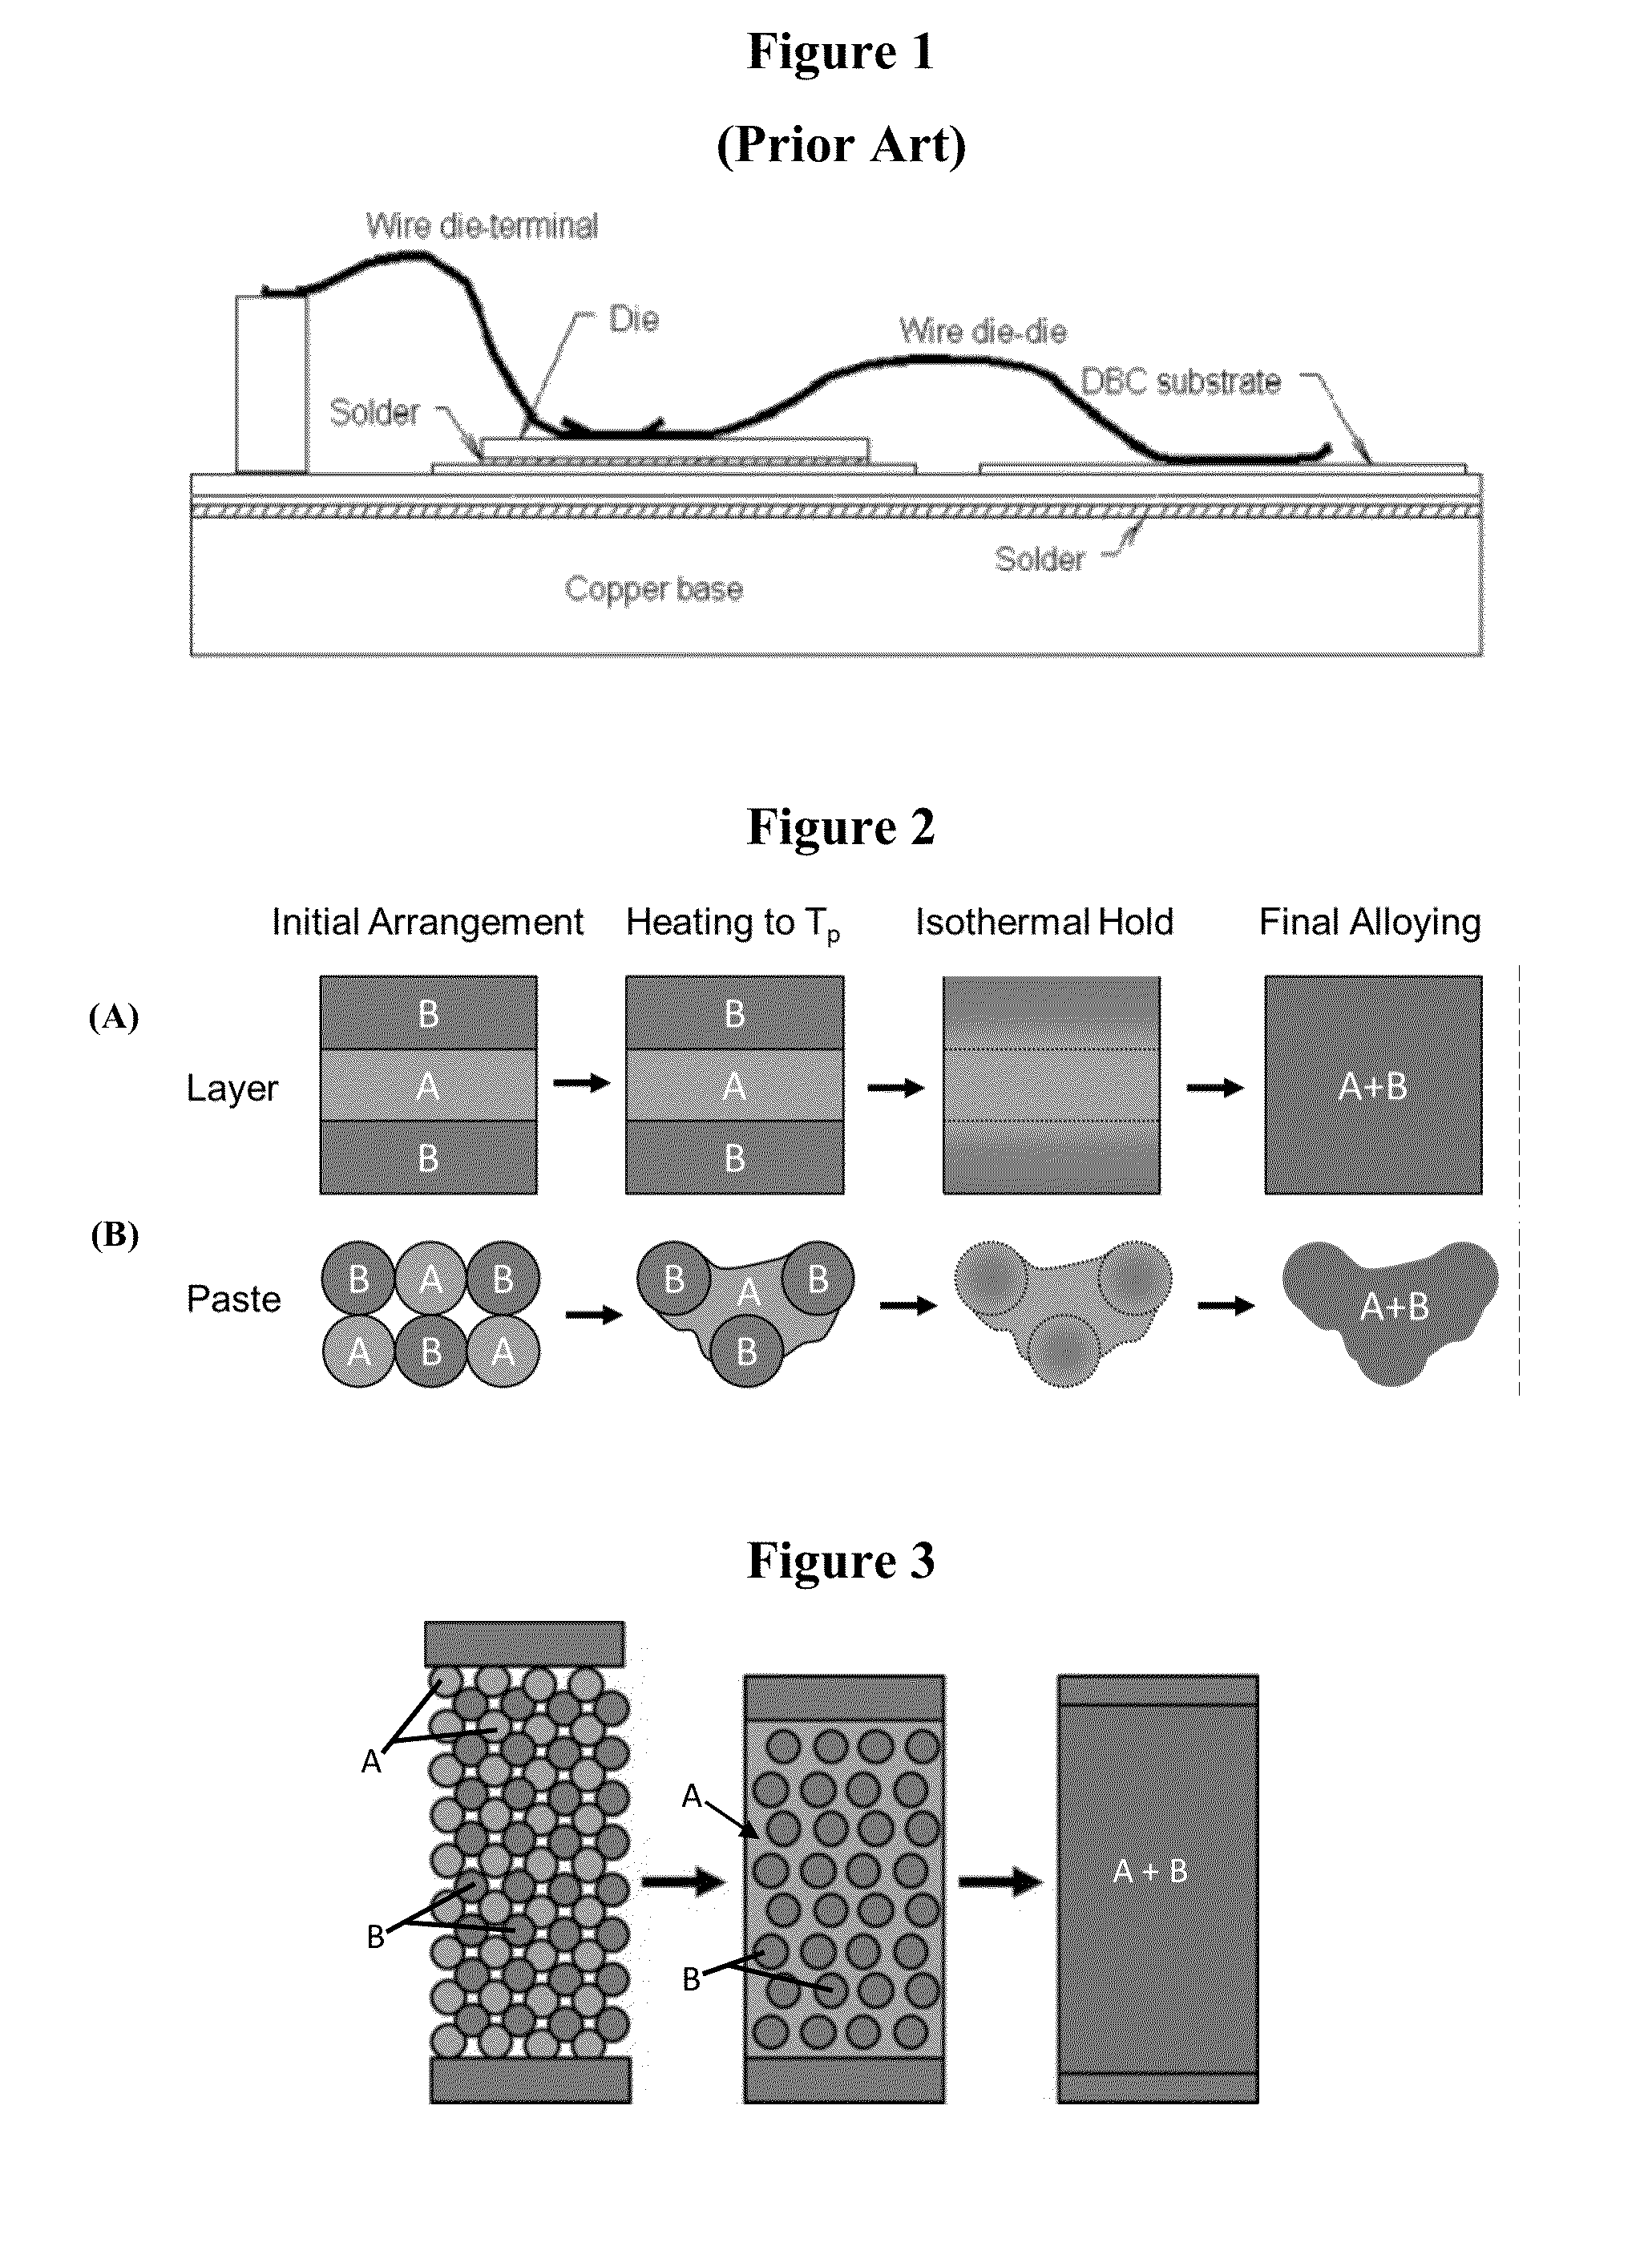 Transient Liquid Phase Sinter Pastes and Application and Processing Methods Relating Thereto